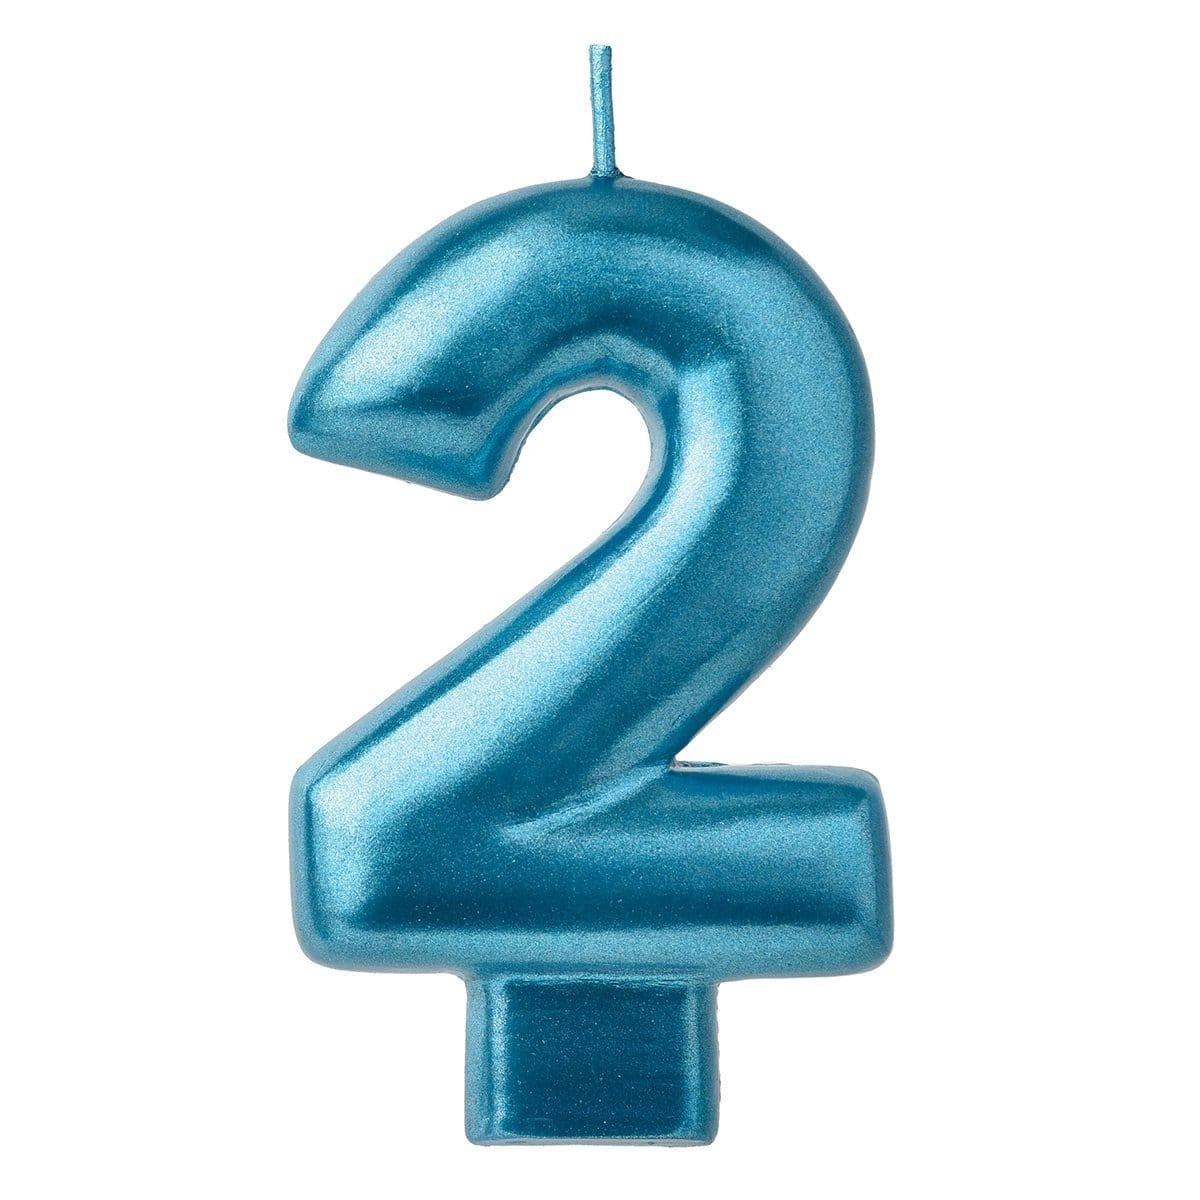 Buy Cake Supplies Blue Numeral Candle #2 sold at Party Expert